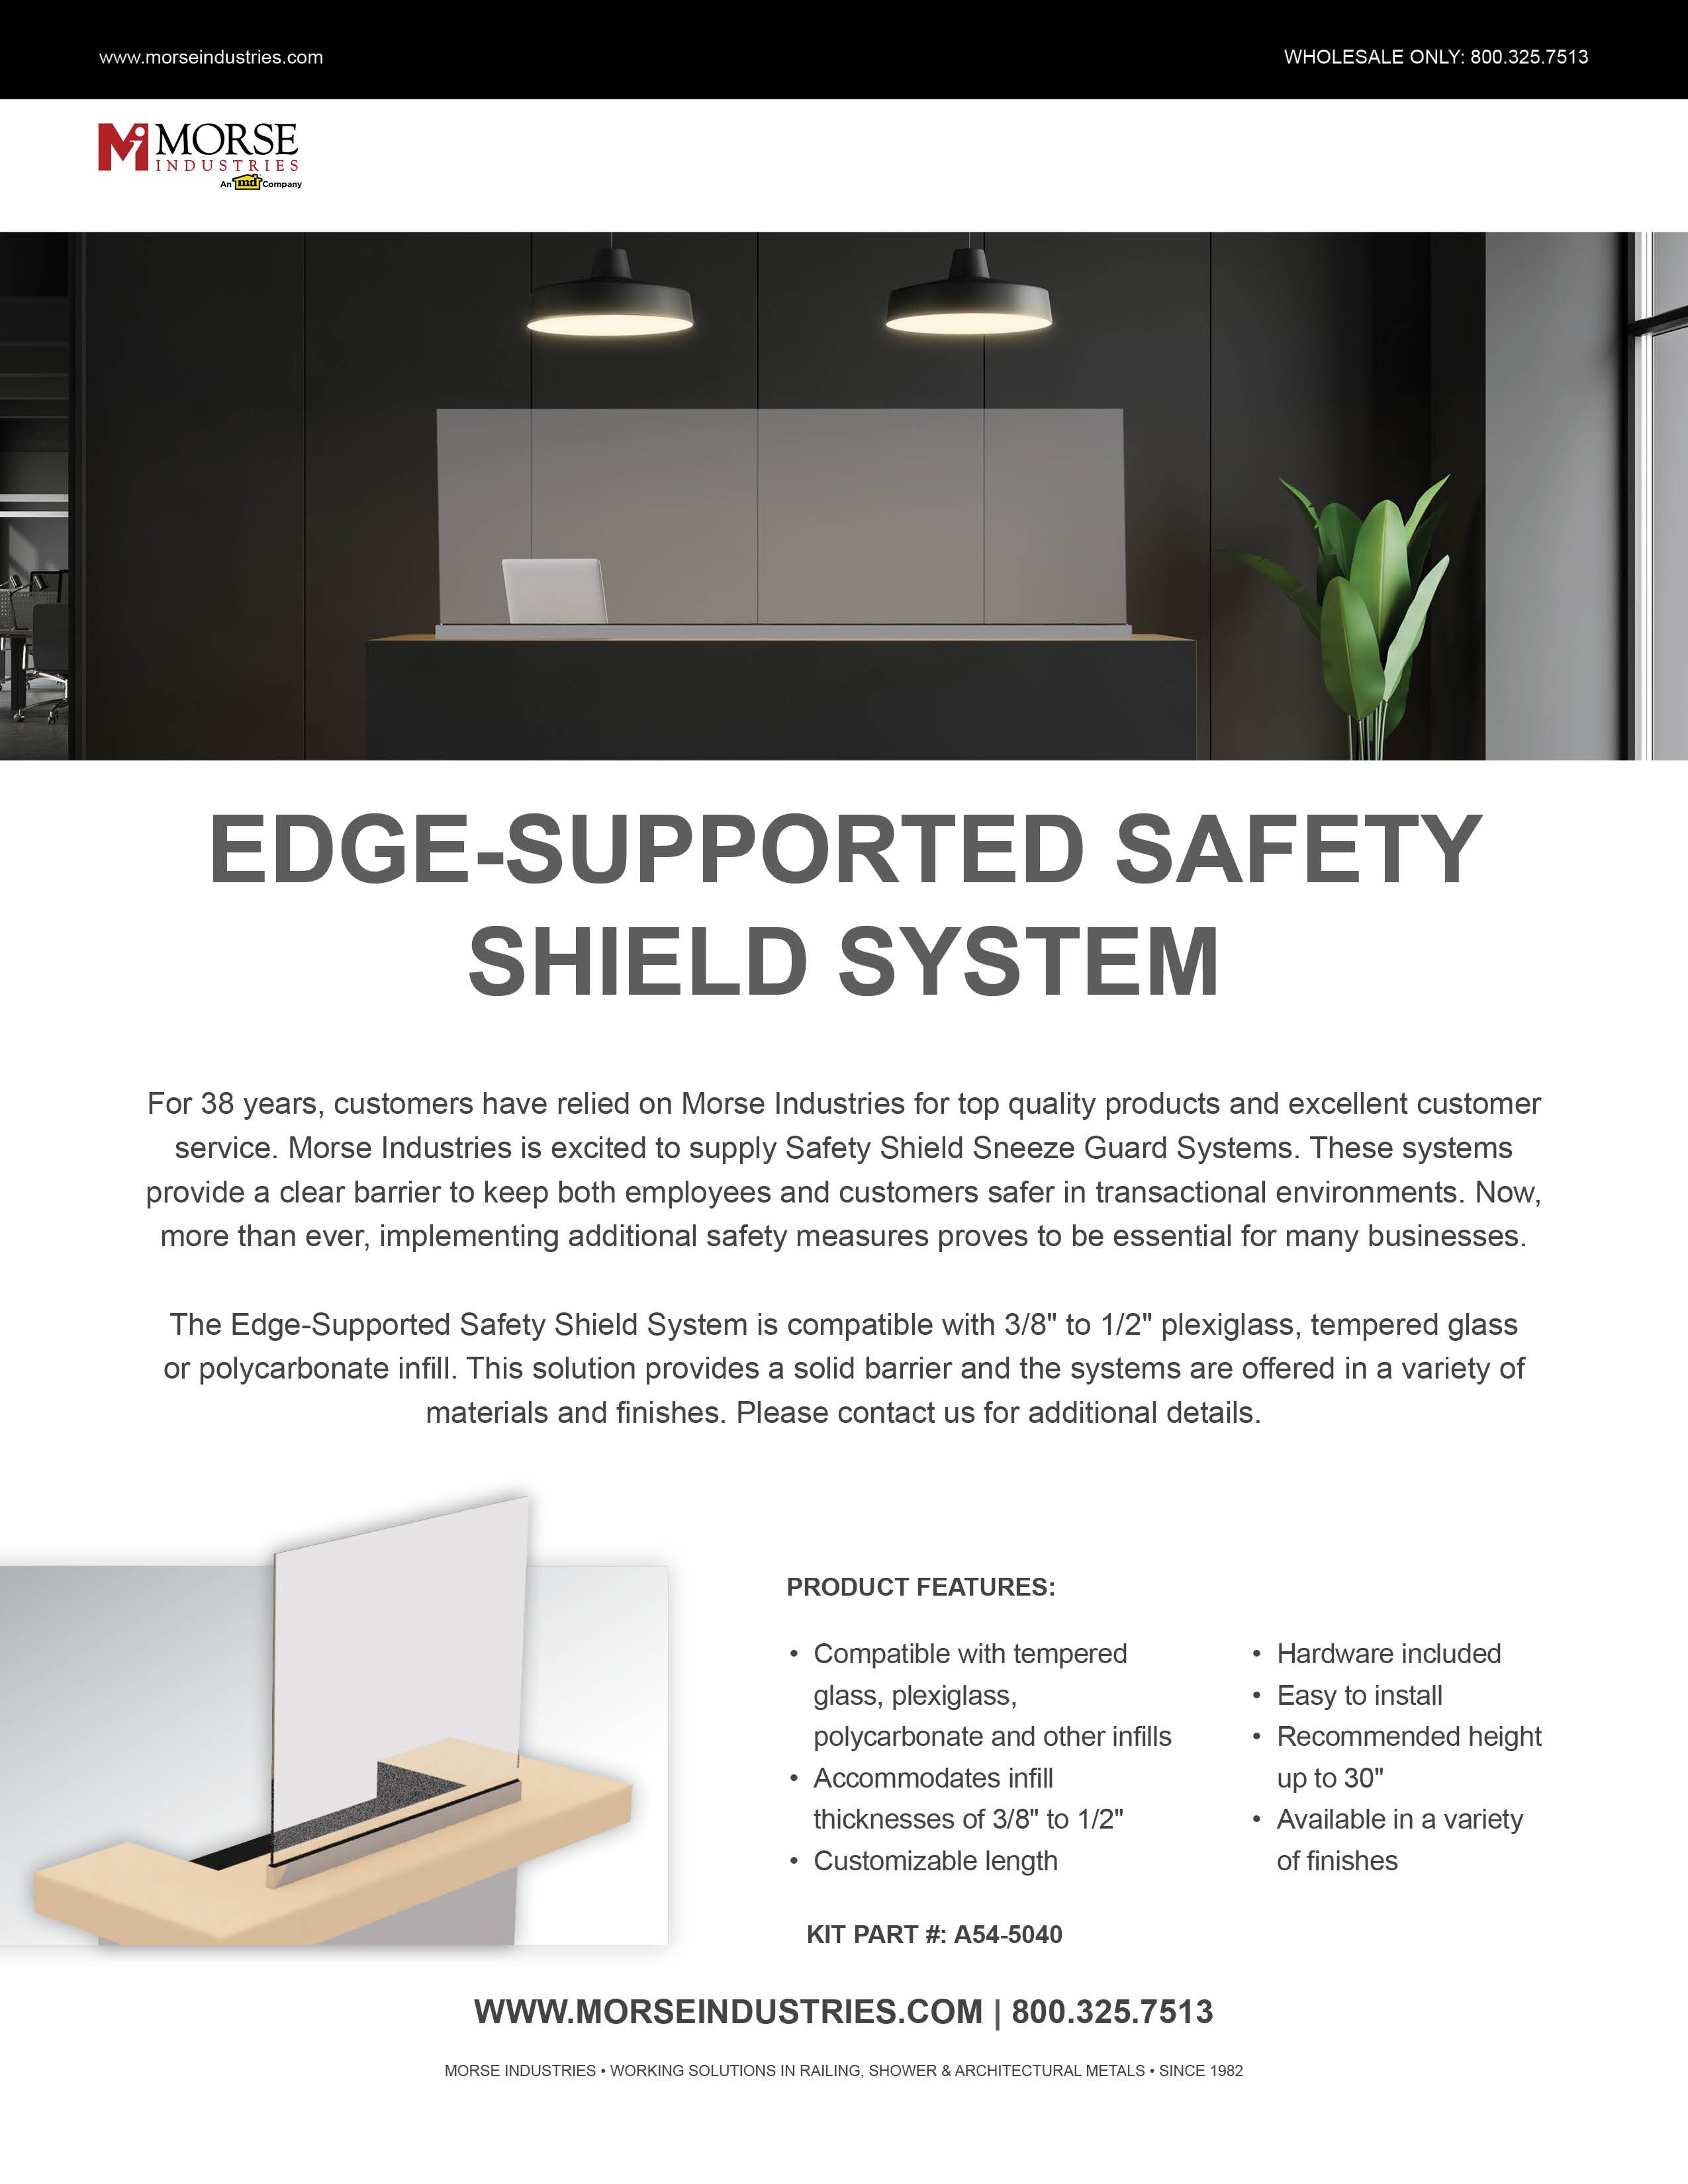  Edge-Supported Safety Shield